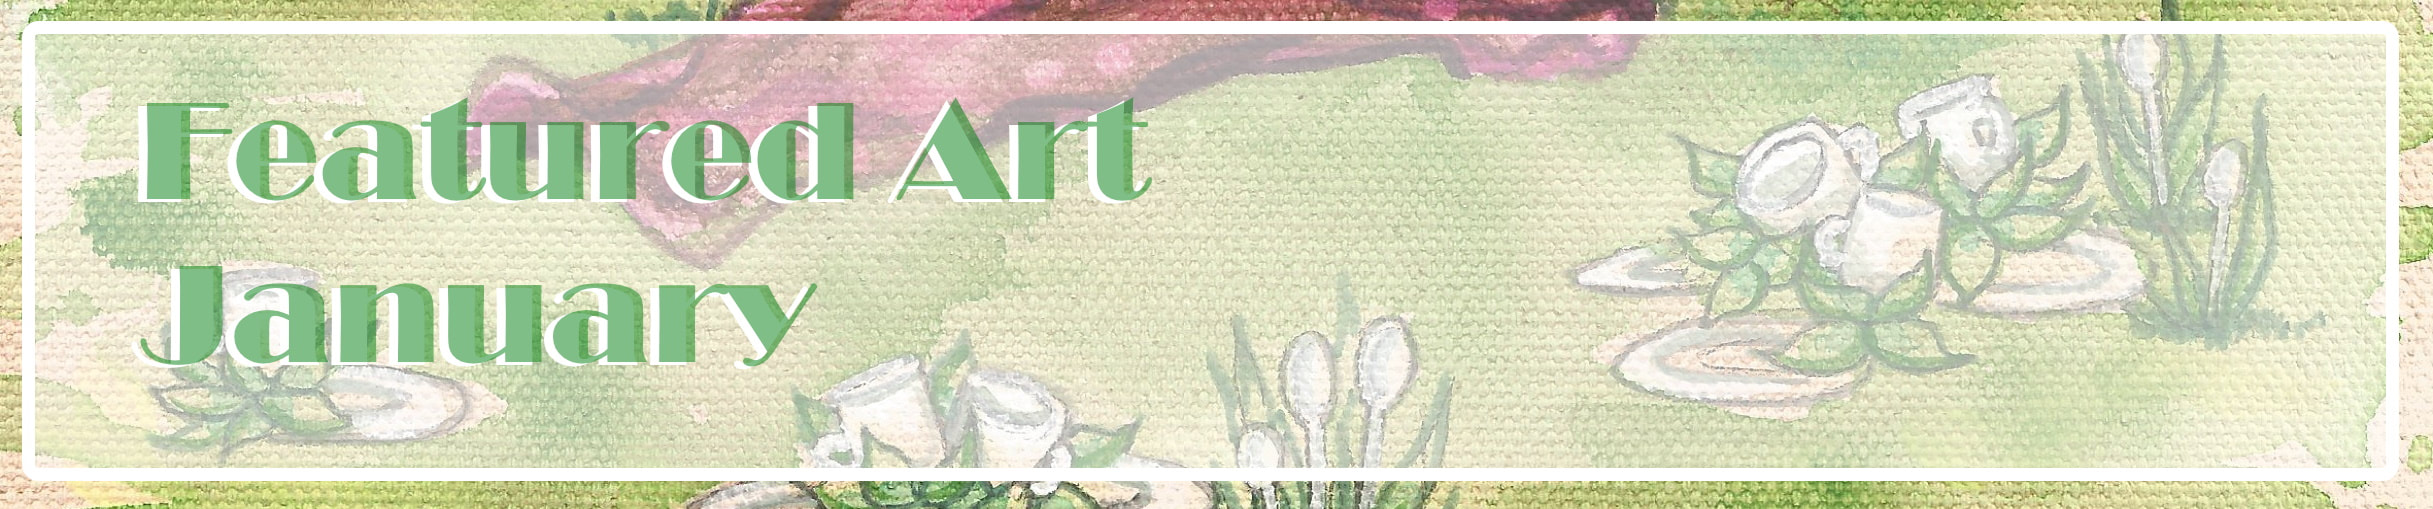 Featured Art Banner (c) Emily White 2021  zombietoes.com